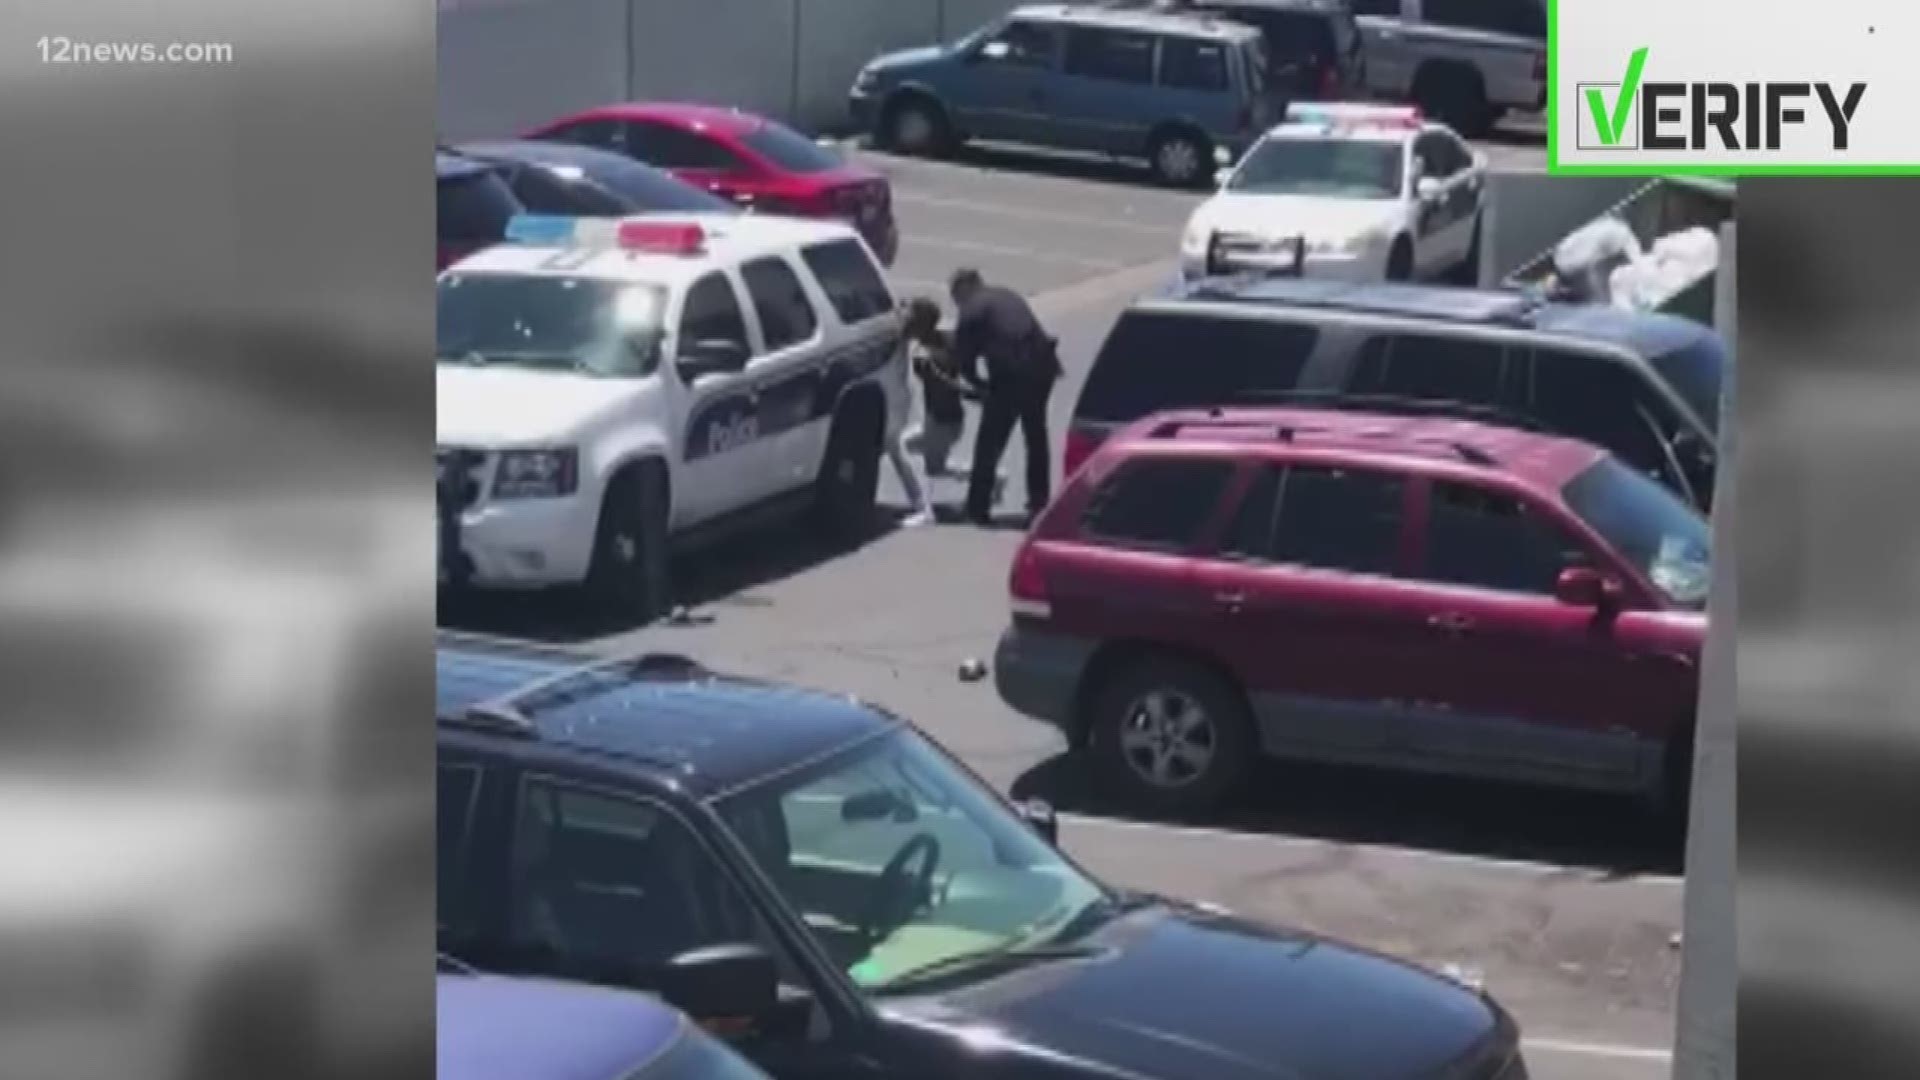 12 News has been working to verify the identities of the officers, their experience and who was doing what in a video that has gone viral that shows an use-of-force incident against a Phoenix family. We verify what we know.